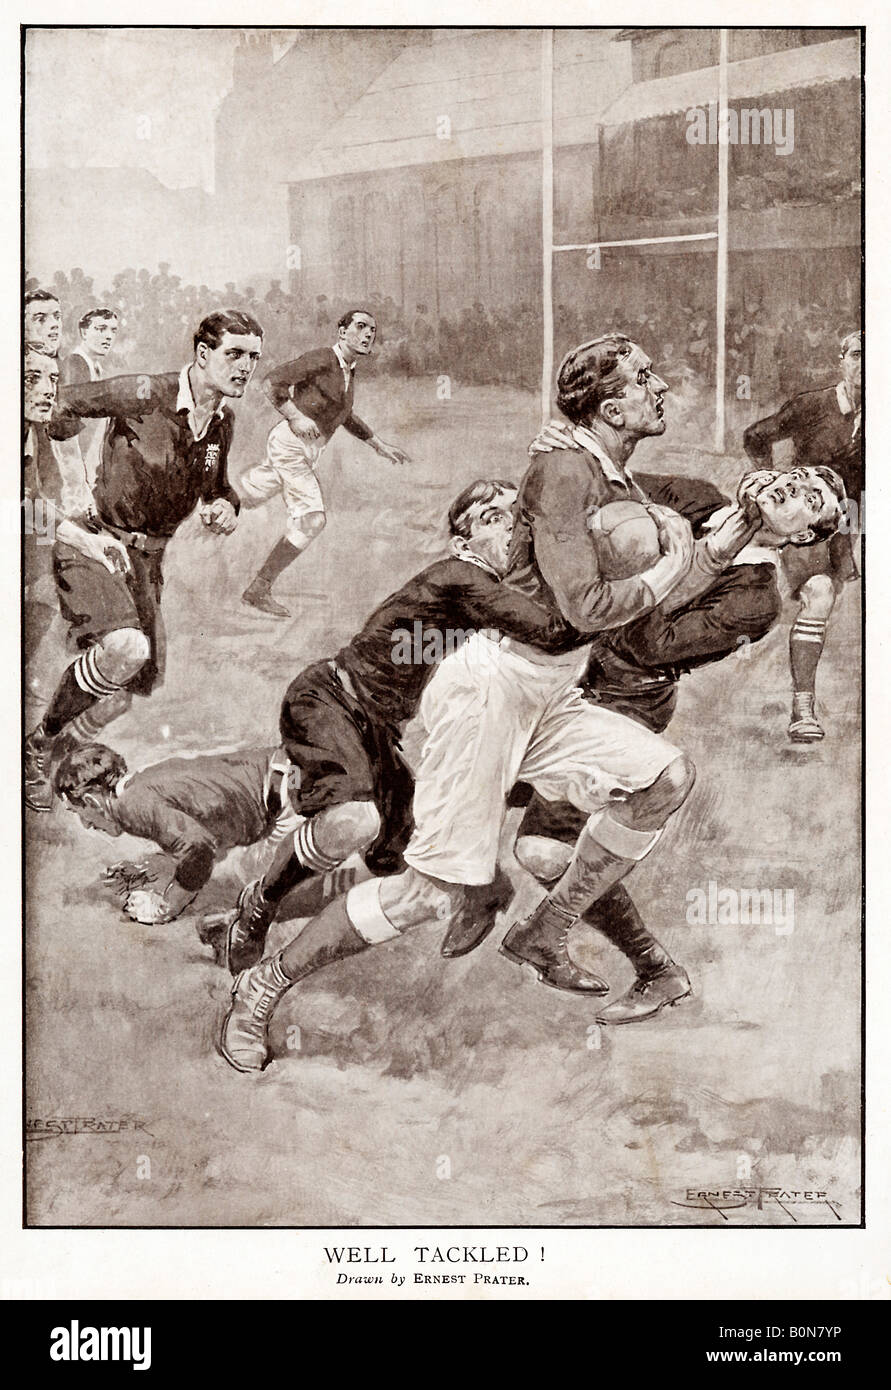 Well Tackled 1920s illustration of an incident in a game of rugby the dash for the line stopped short Stock Photo